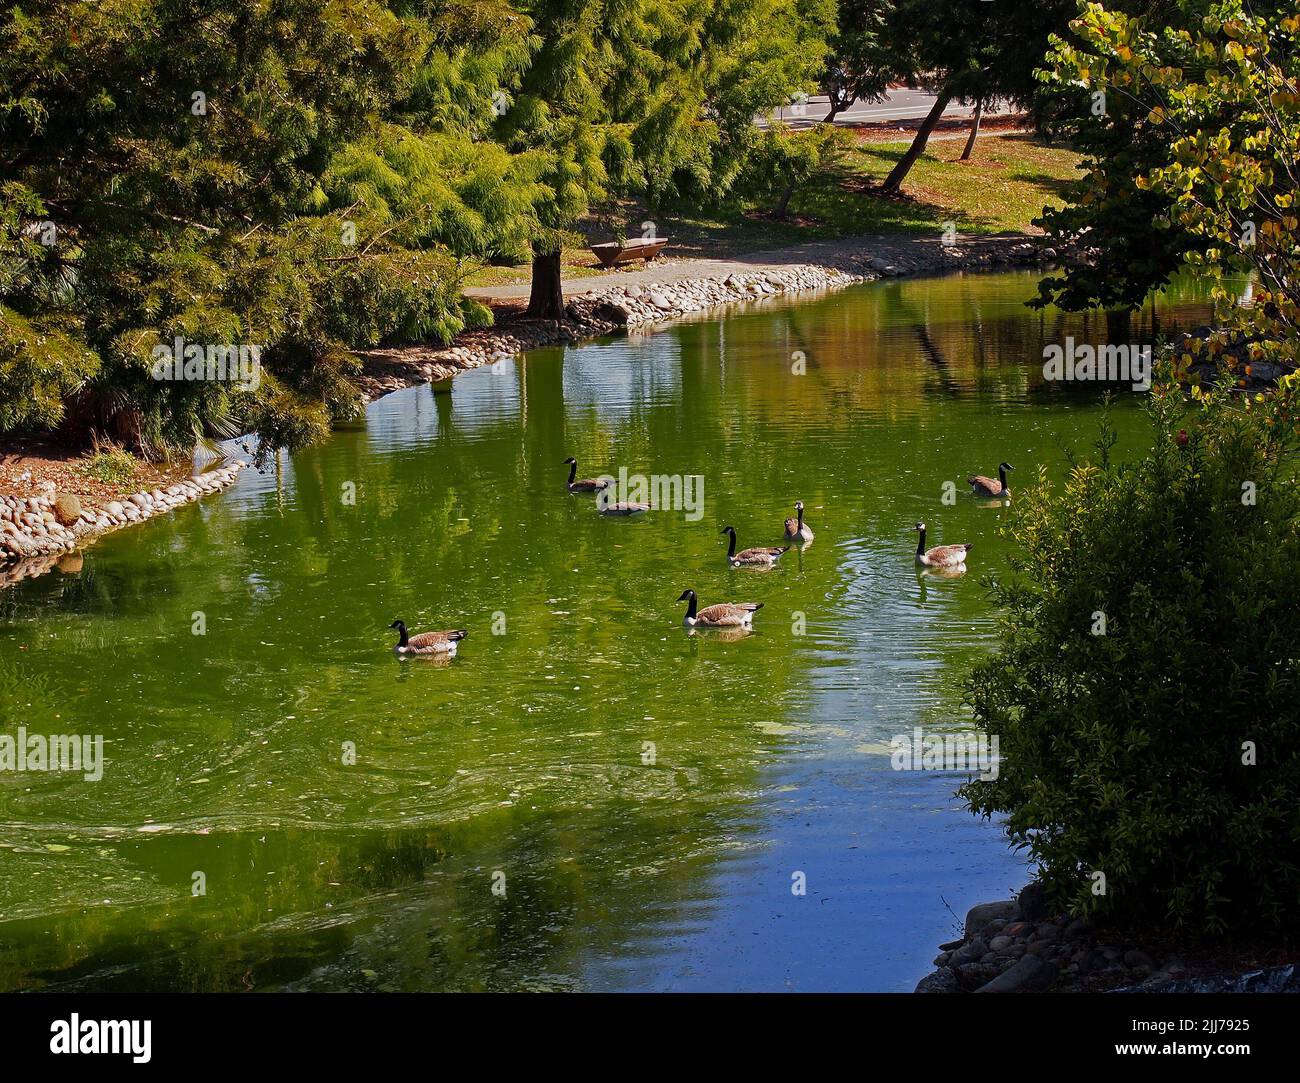 Canada Geese float on pond in William Cann Civic Center pond in Union City, California Stock Photo